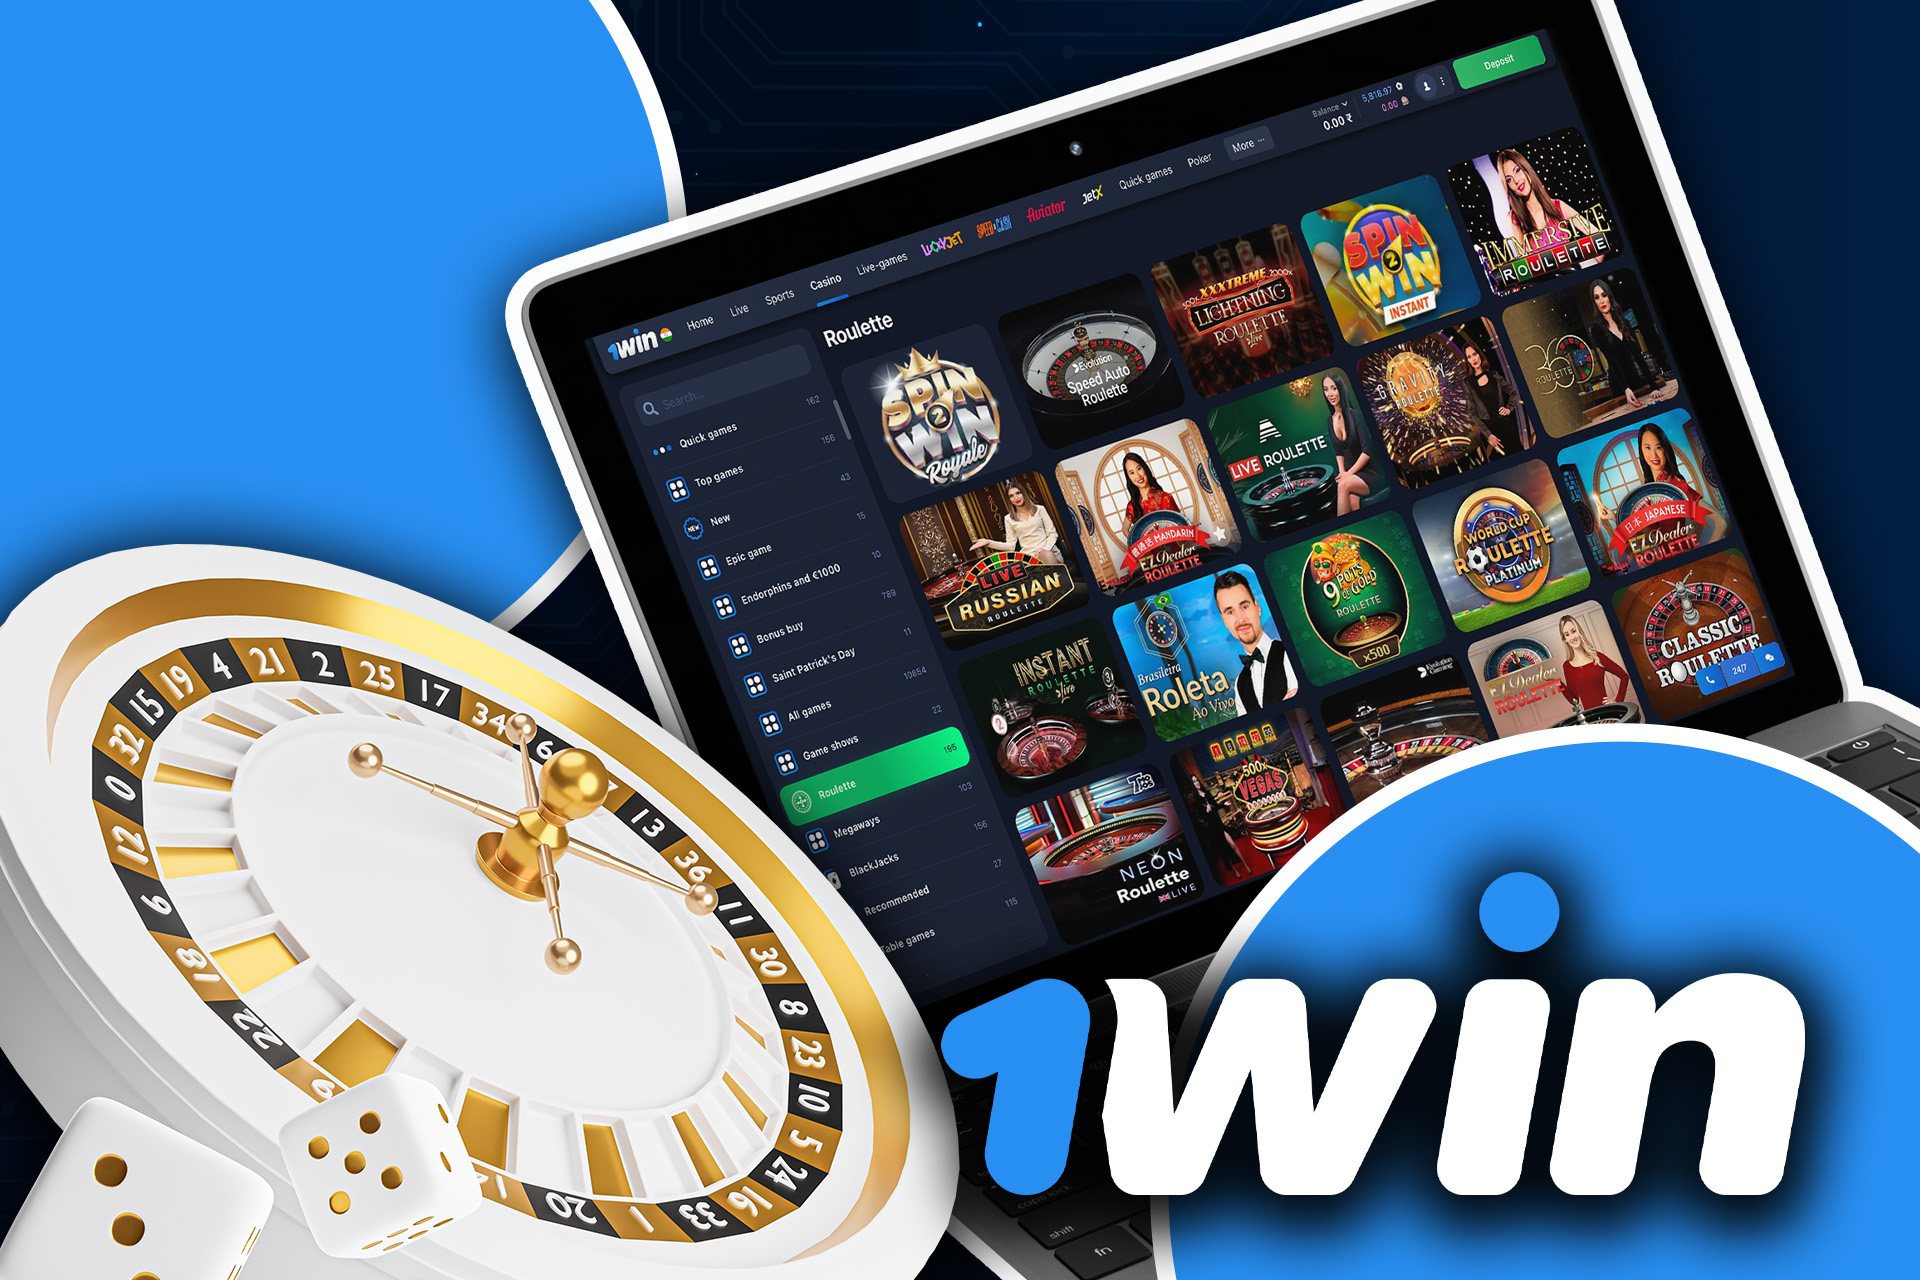 You can easily find the most well-known casino game - roulette - on 1win.